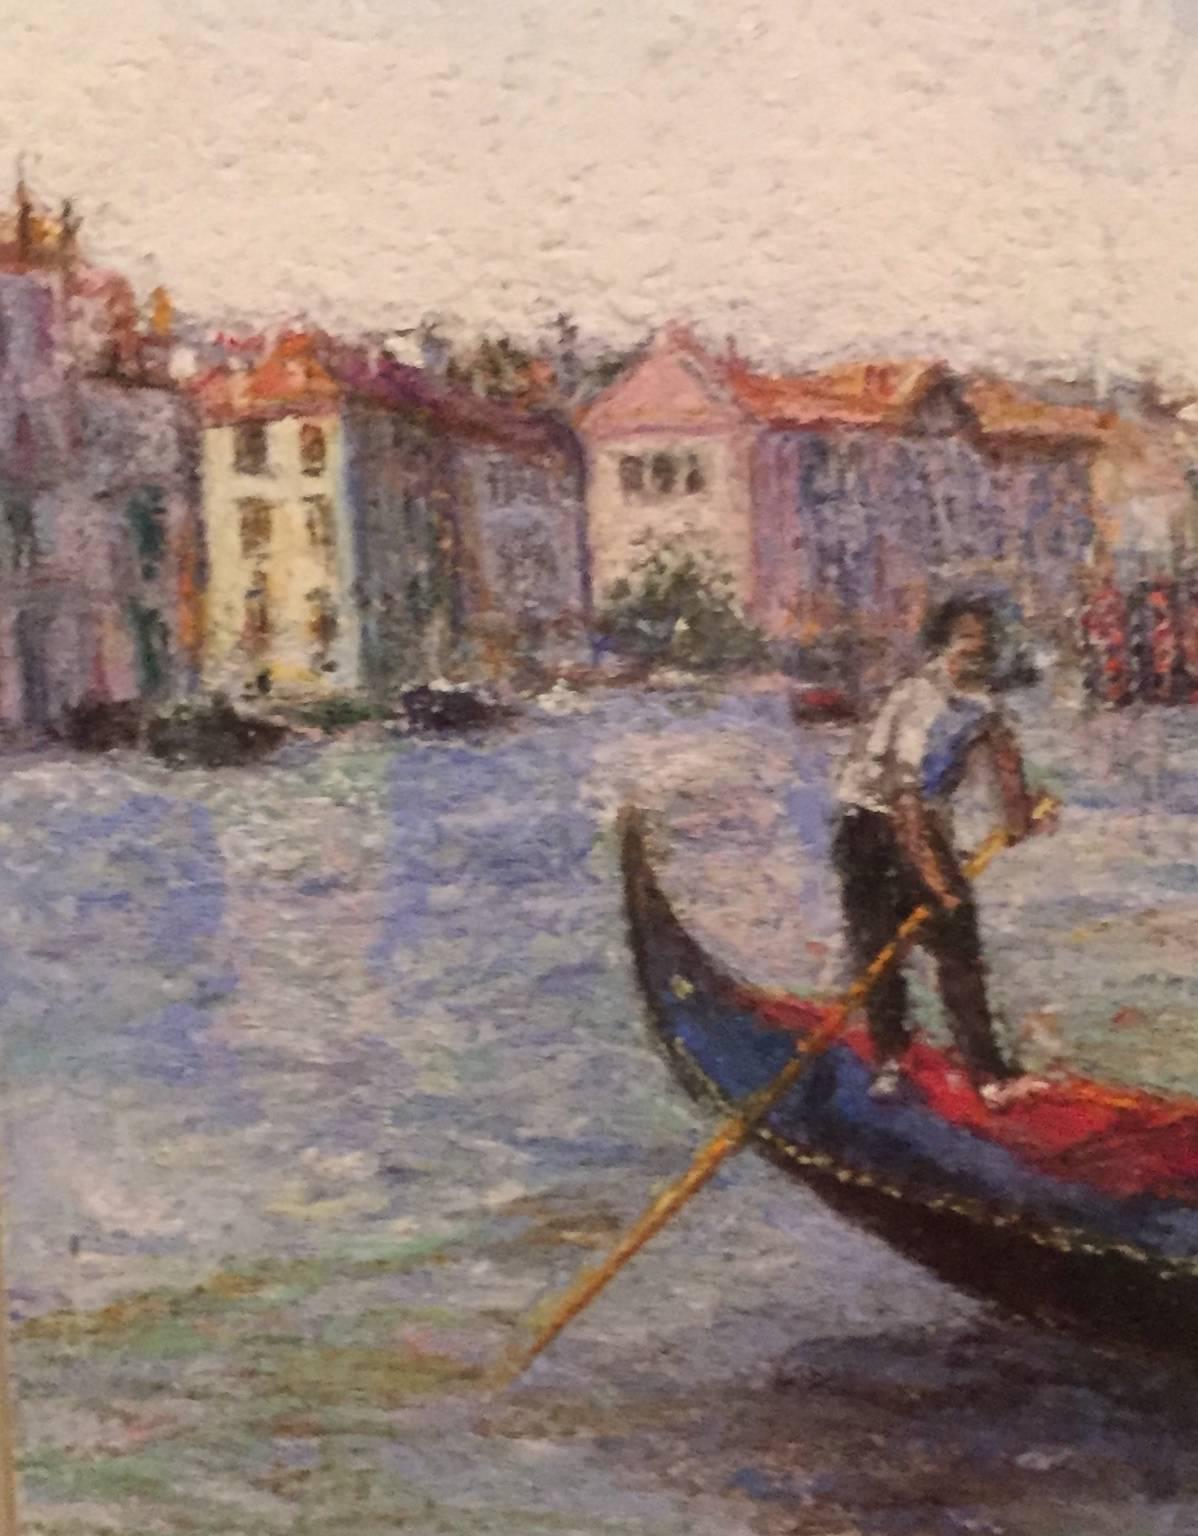 H. Claude Pissarro, grandson of the 19th century renowned French impressionist Camille Pissarro, is the third generation standard bearer of the Pissarro line of painters. 

Camille Pissarro, whose paintings have clearly taken their place in the